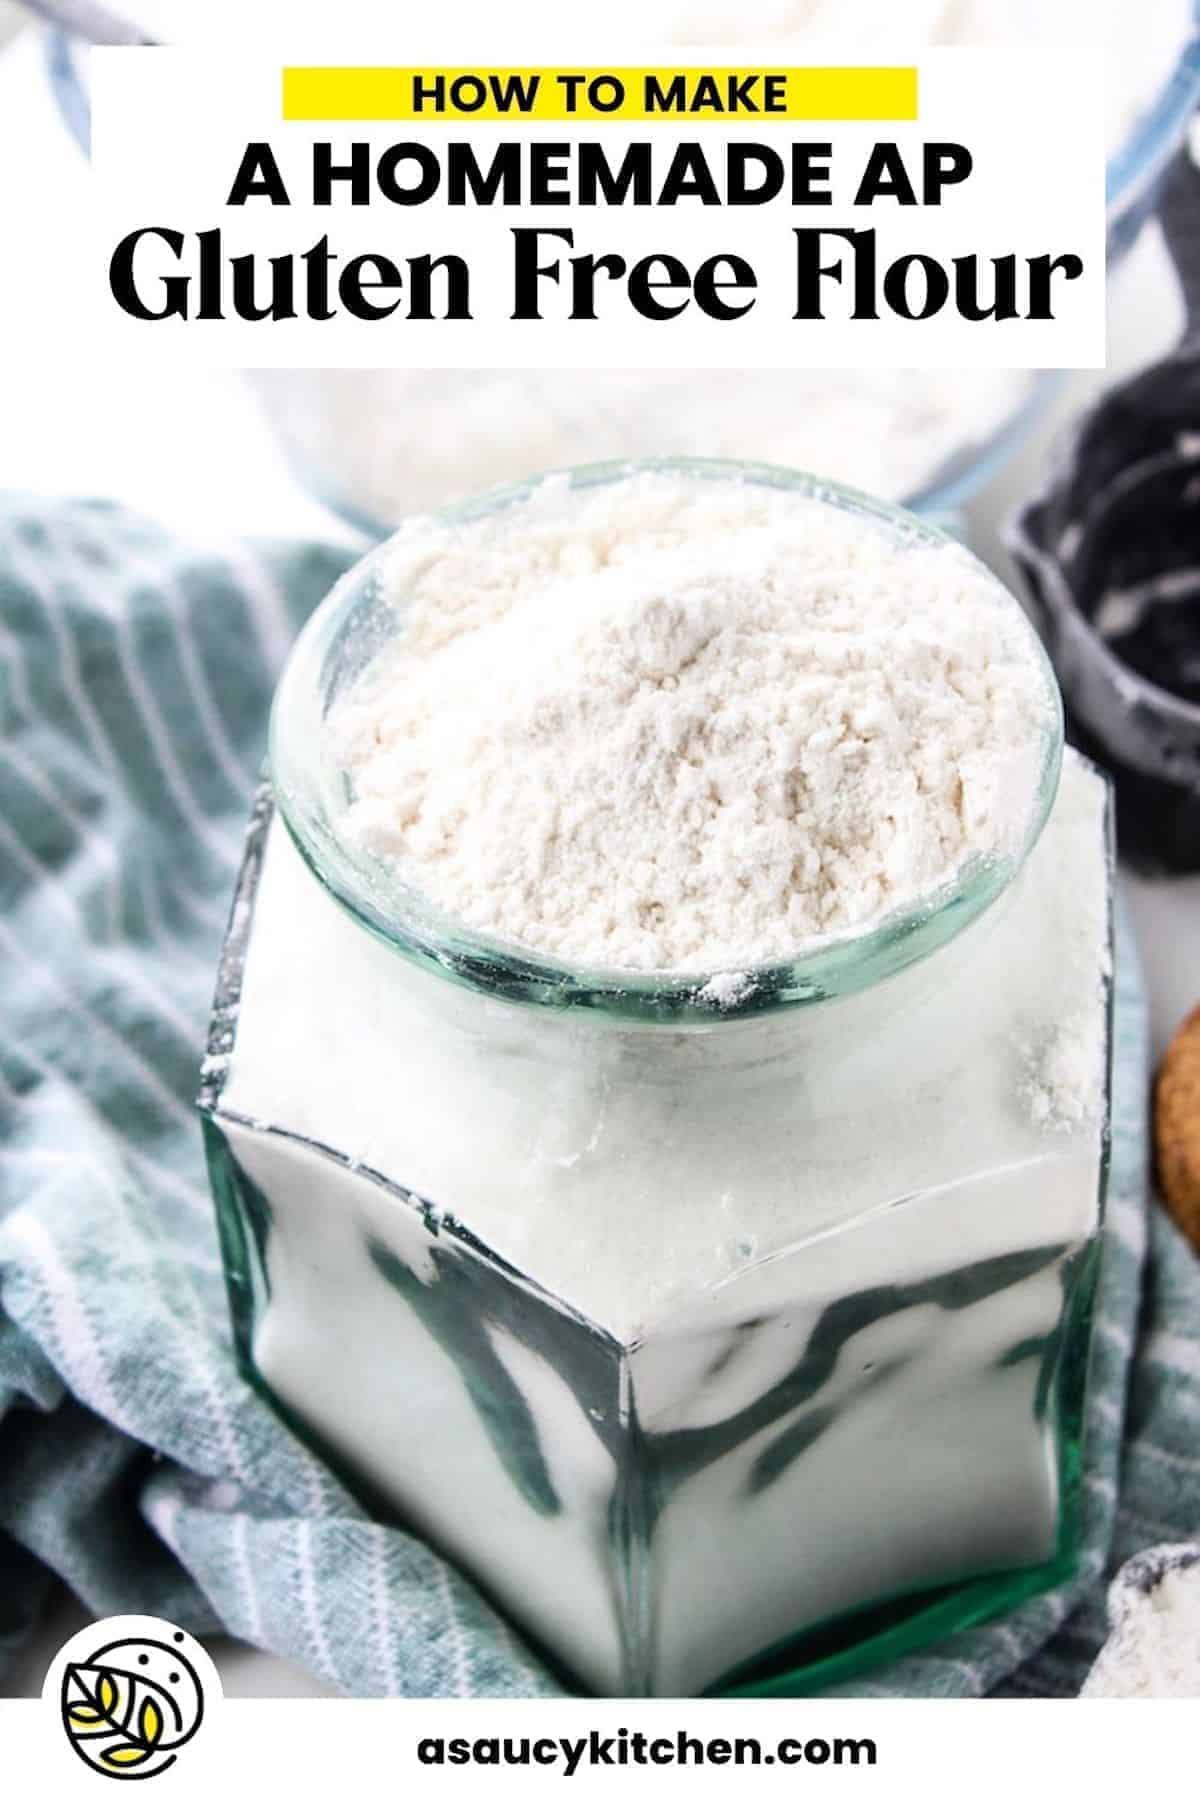 How to Make Your Own Homemade Gluten Free Flour Blend